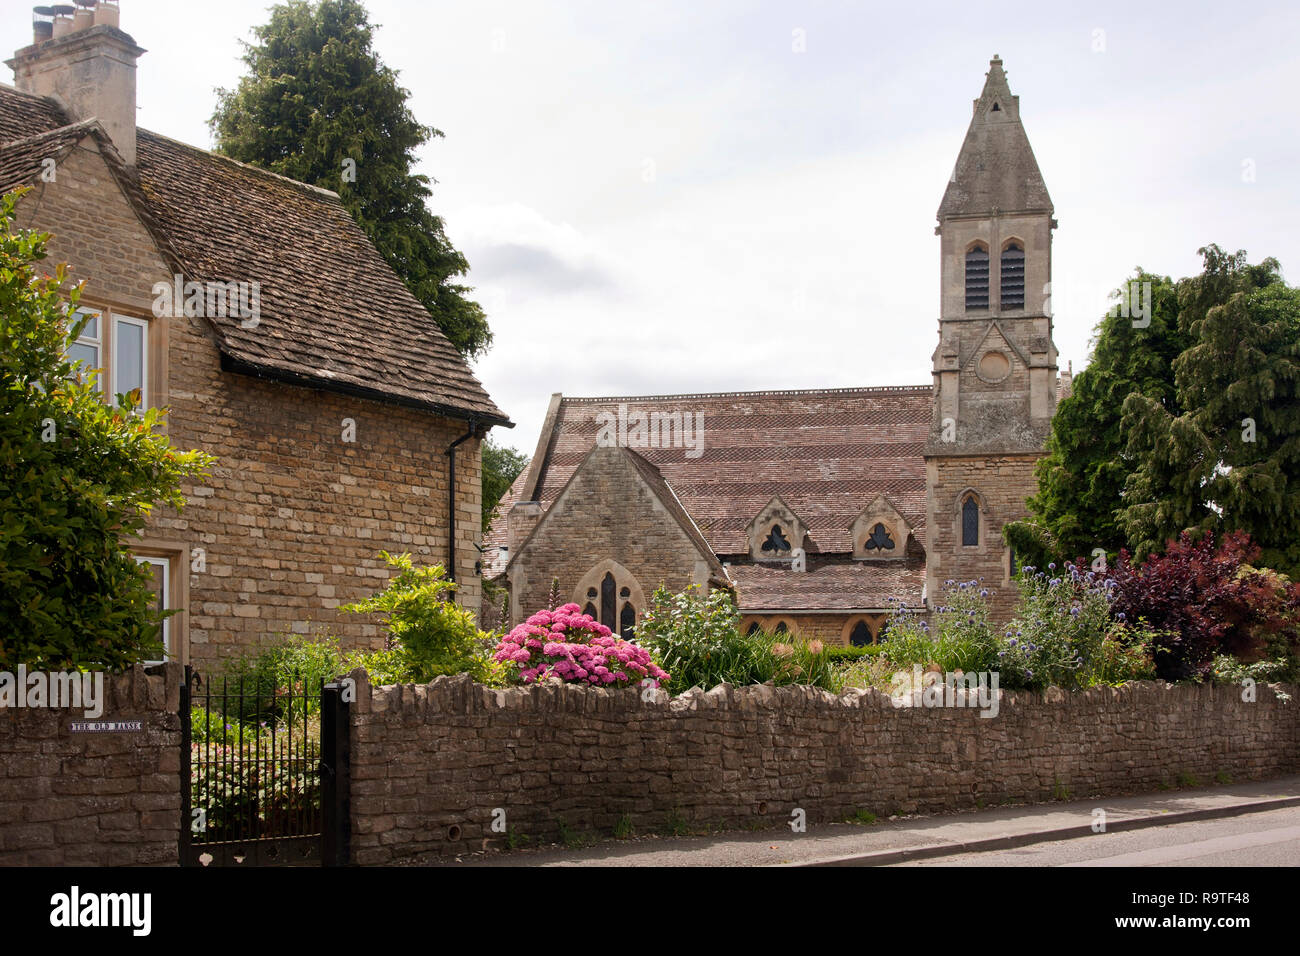 United Reformed Church in the village, Holt, near Trowbridge, Wiltshire, England Stock Photo